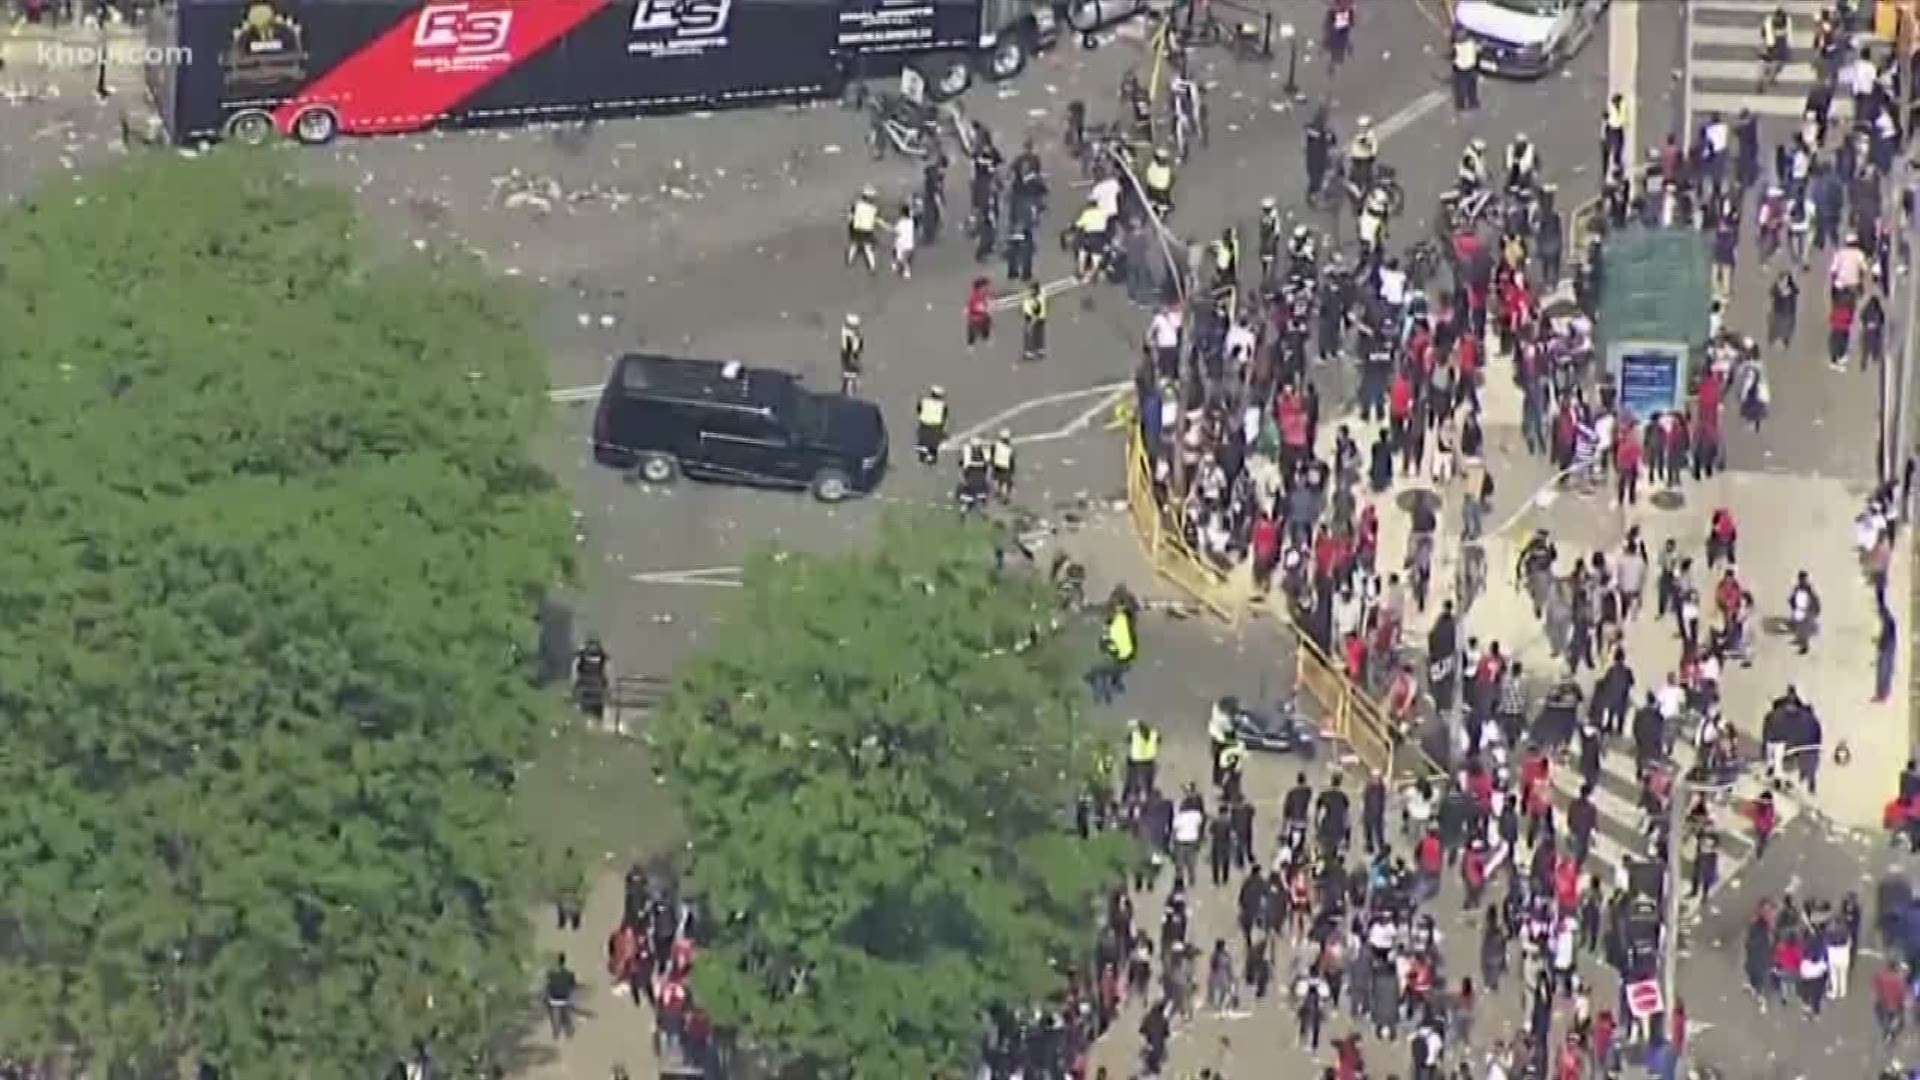 Toronto police say someone started shooting near the victory parade for the NBA champion Raptors. Plus, a Roman Forest police officer was riding his motorcycle, escorting heavy equipment on the North loop when a pickup truck hit him.